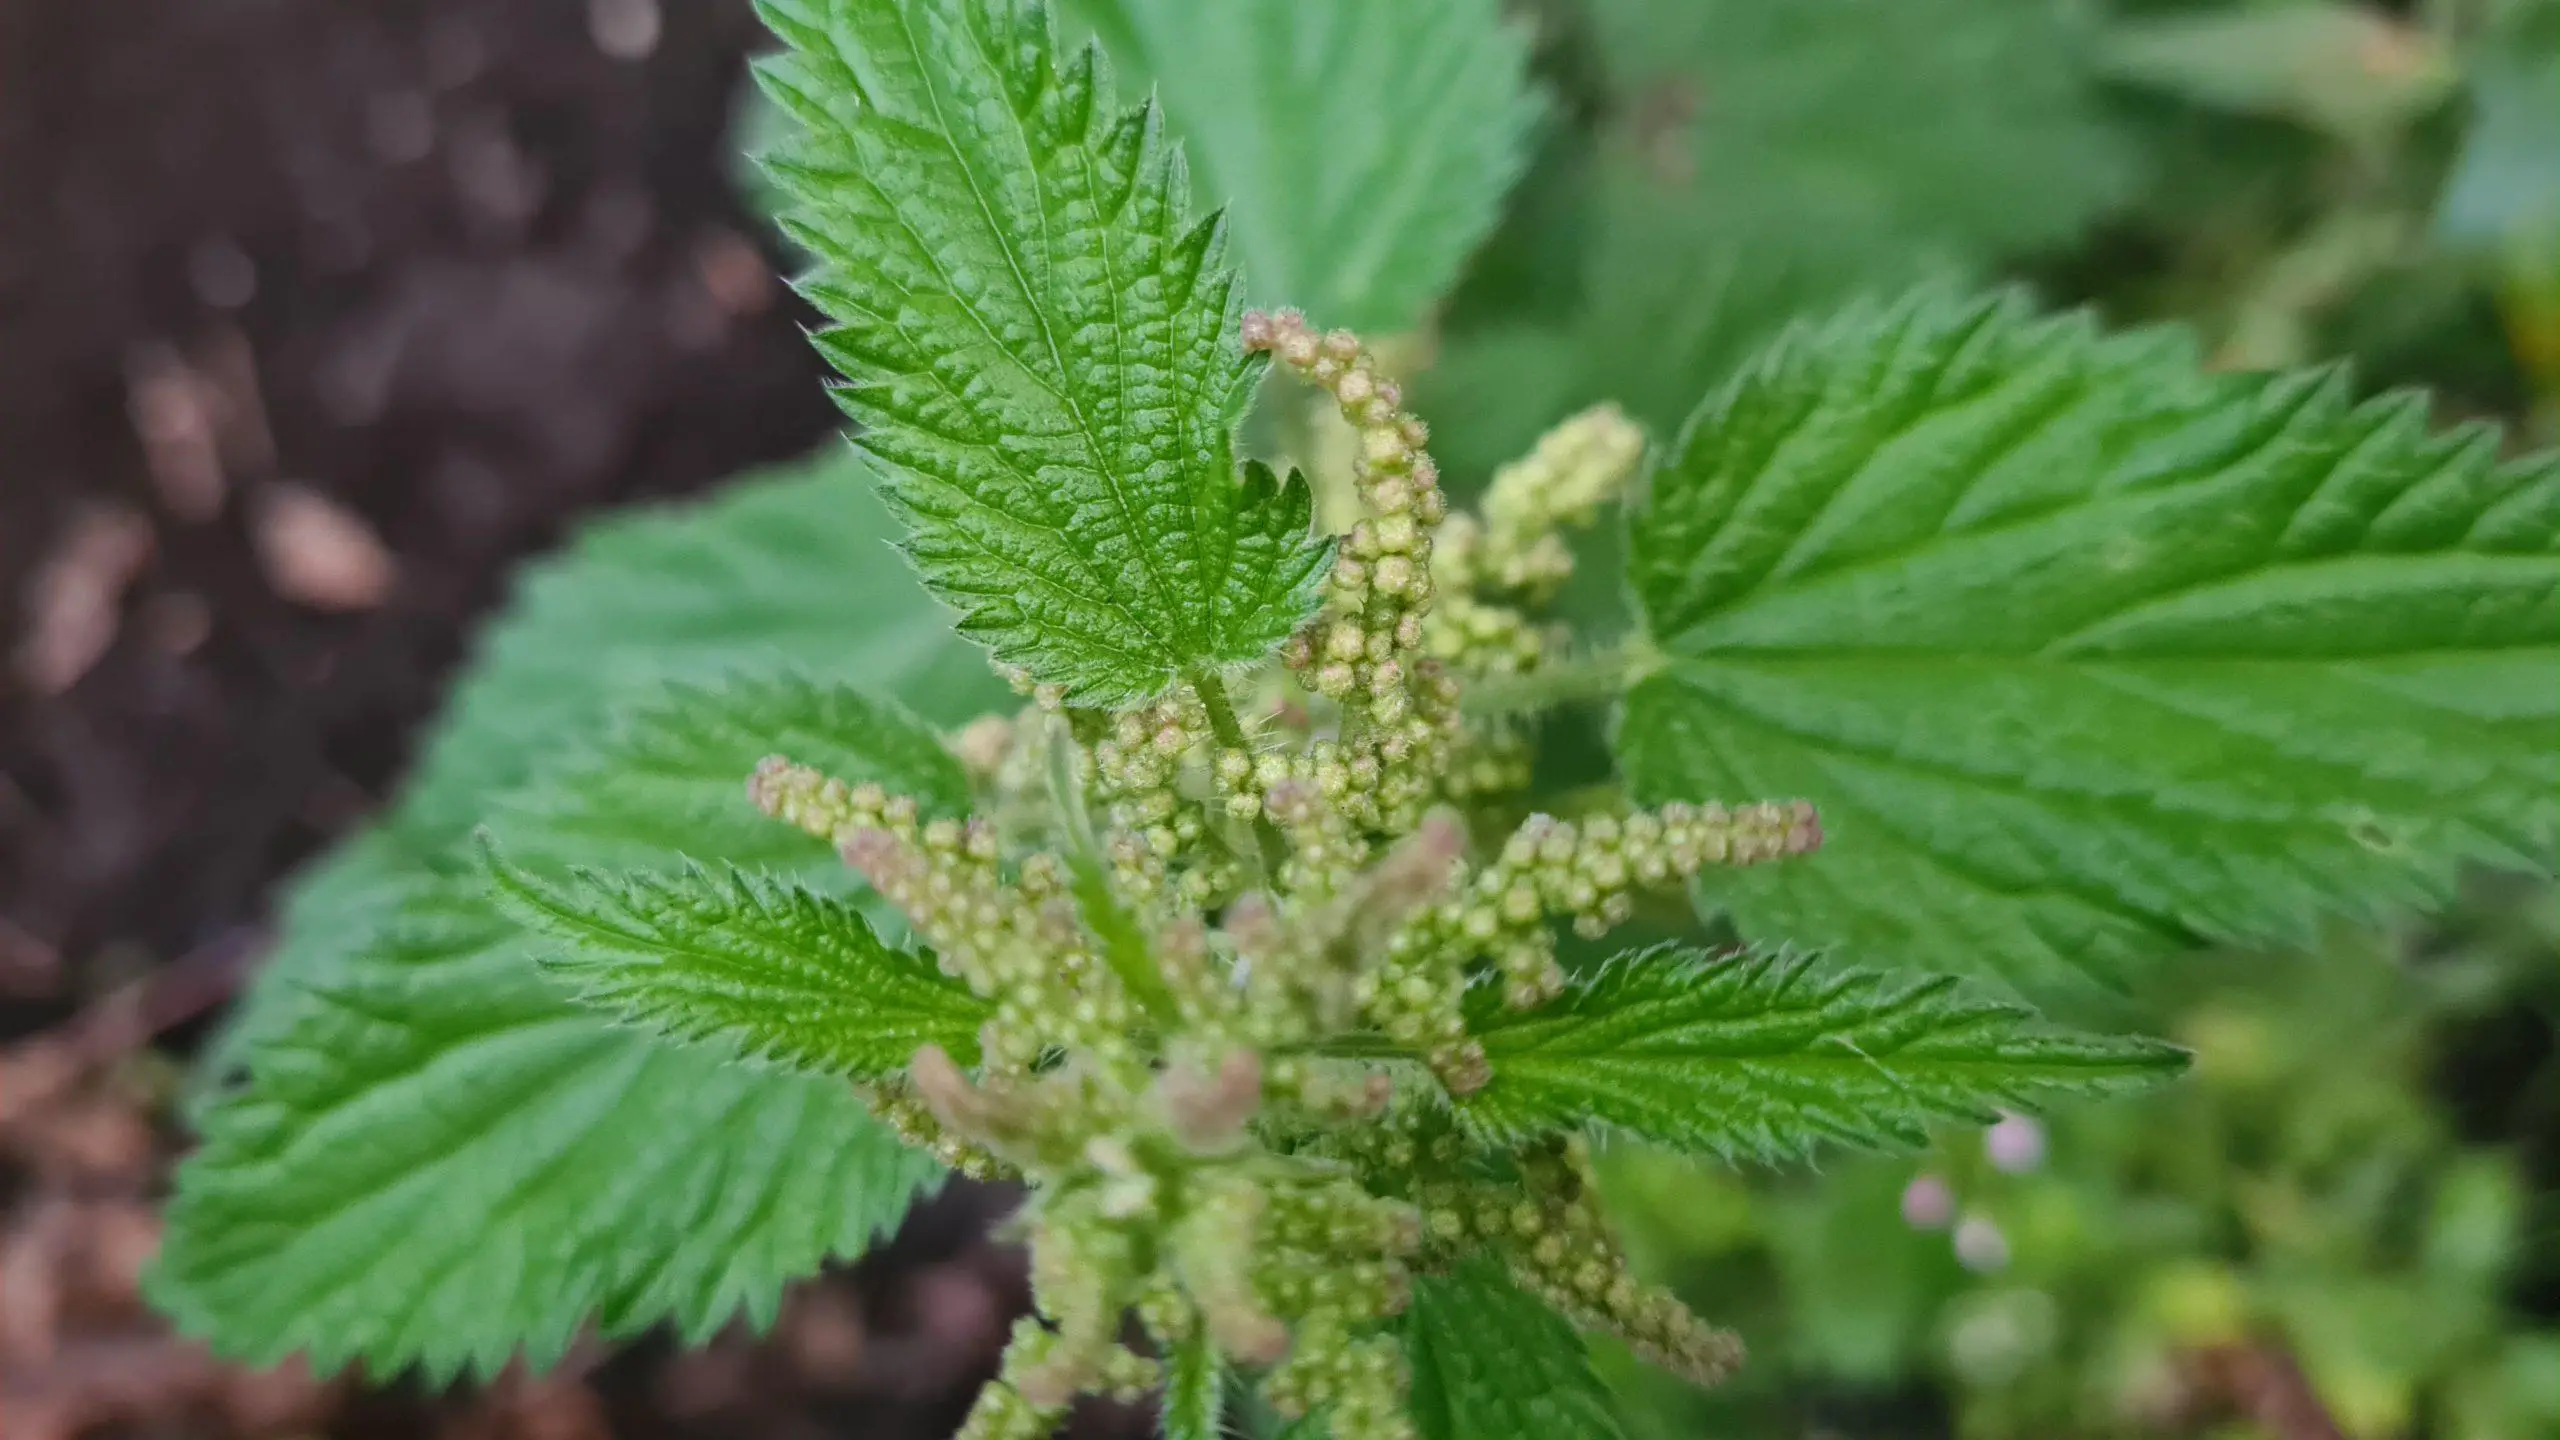 Stinging nettles seeds ready to spawn within a garden